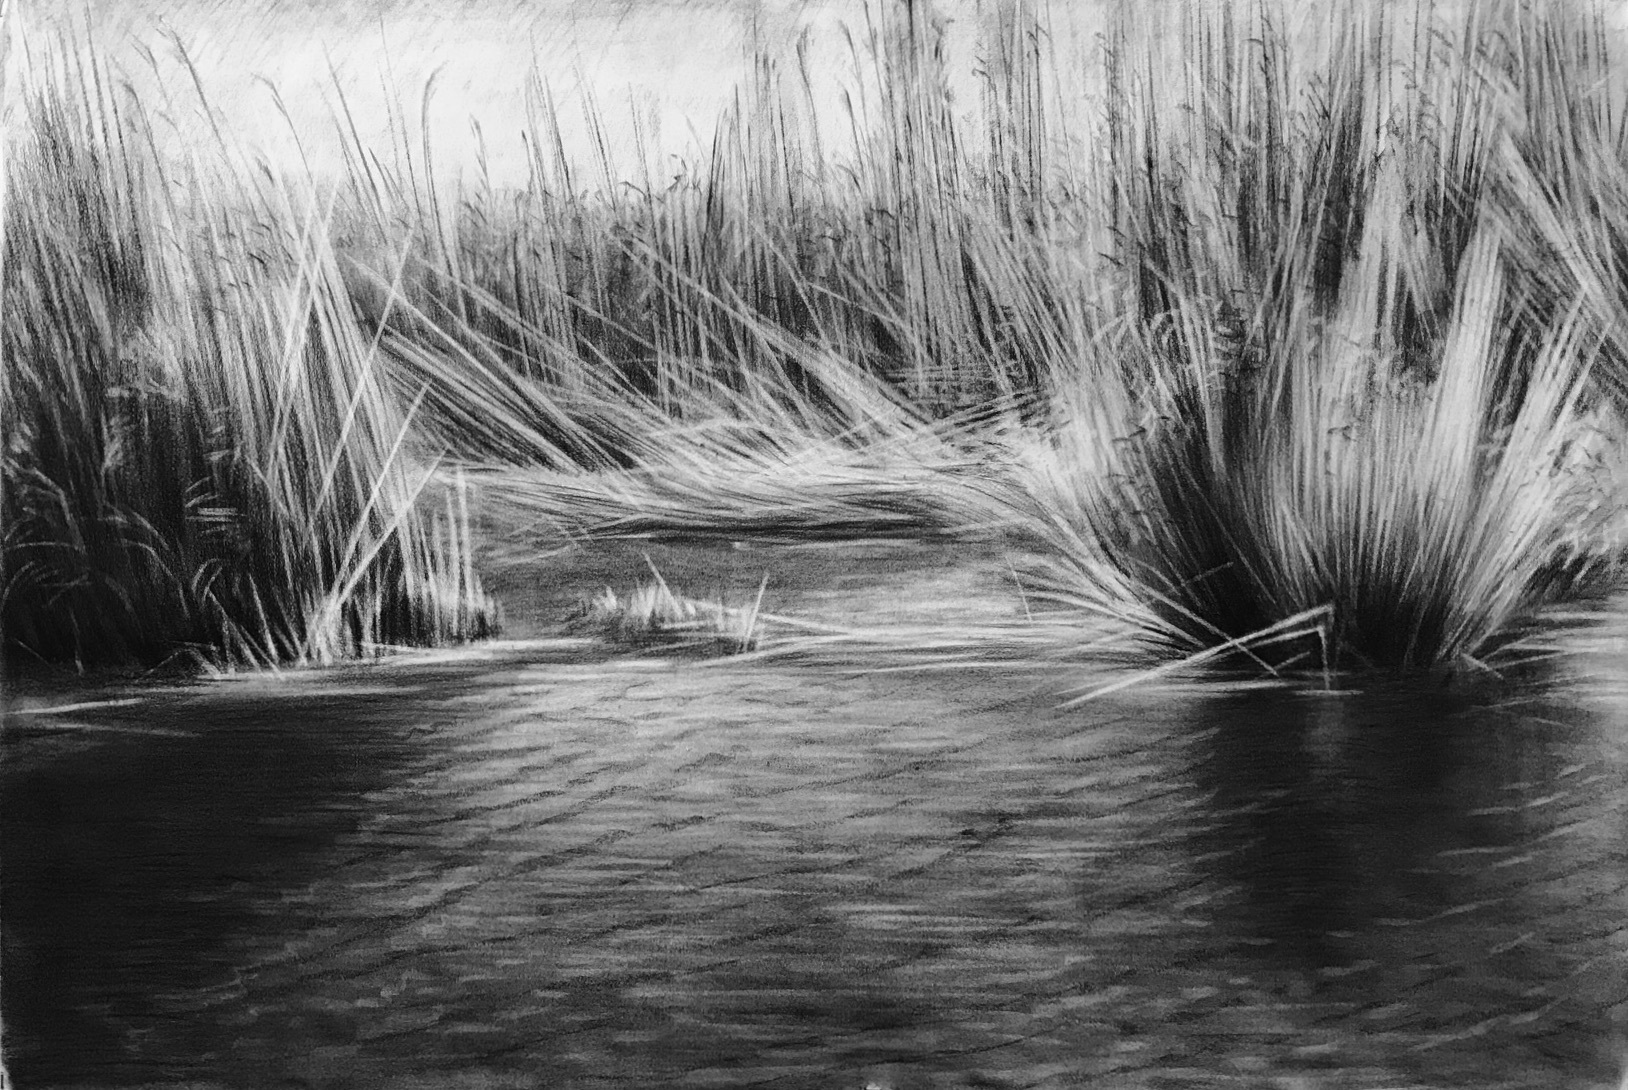 Ken Mazzu, A Cove In the Marsh #2, 2023, Charcoal on paper